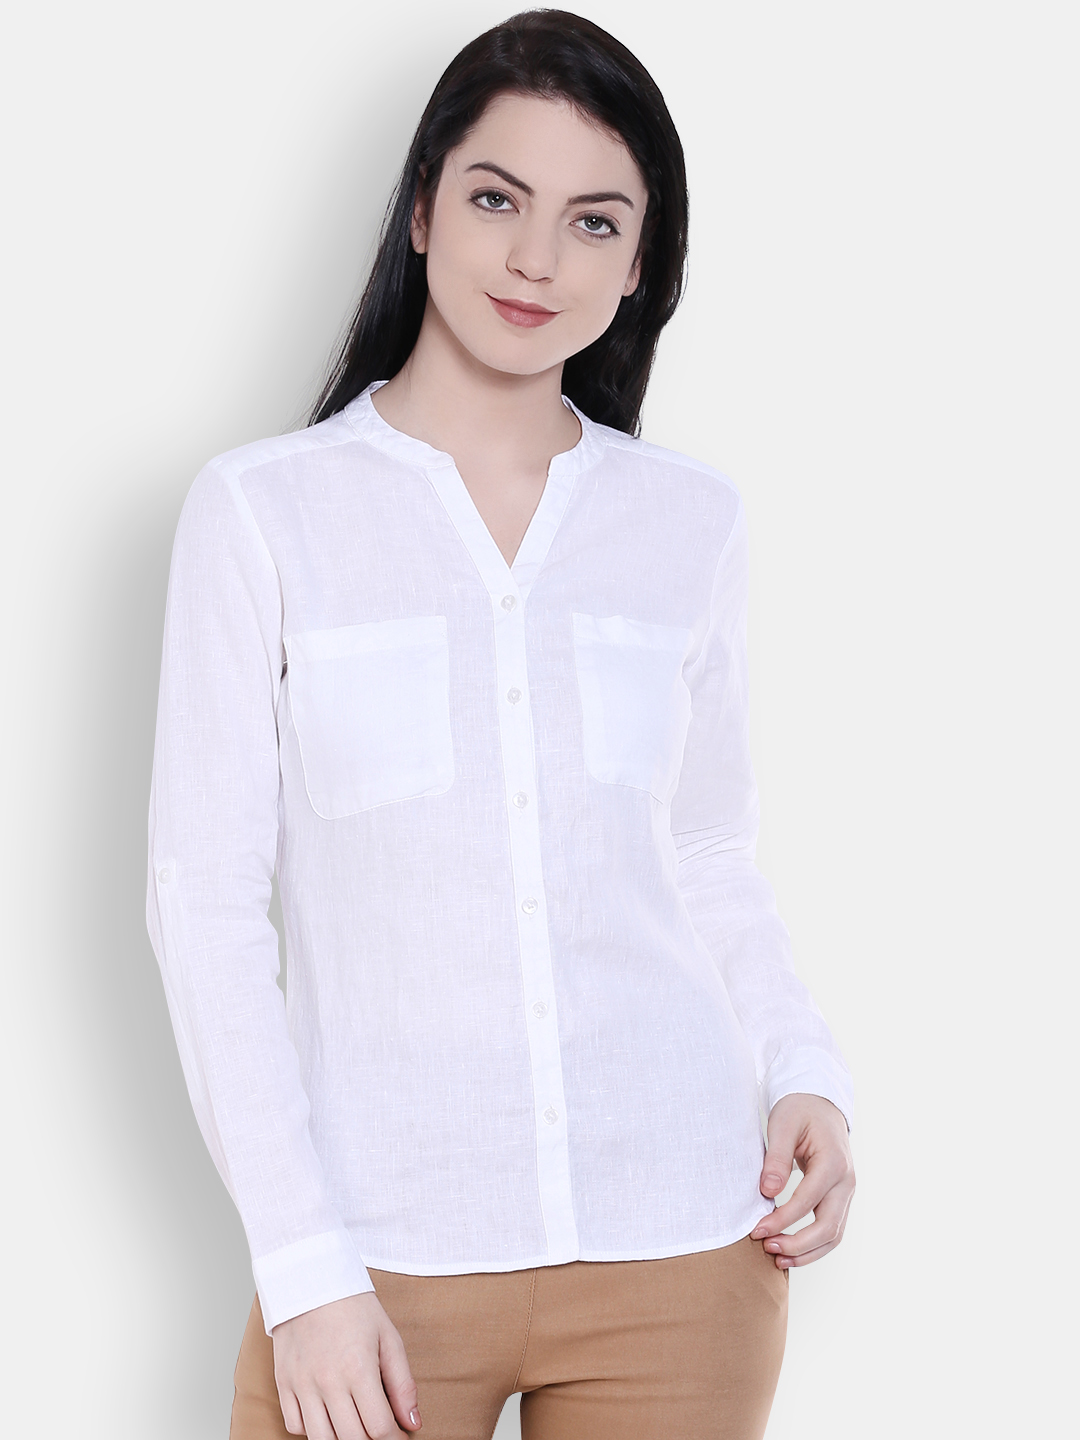 Allen Solly Woman White Solid Casual Shirt